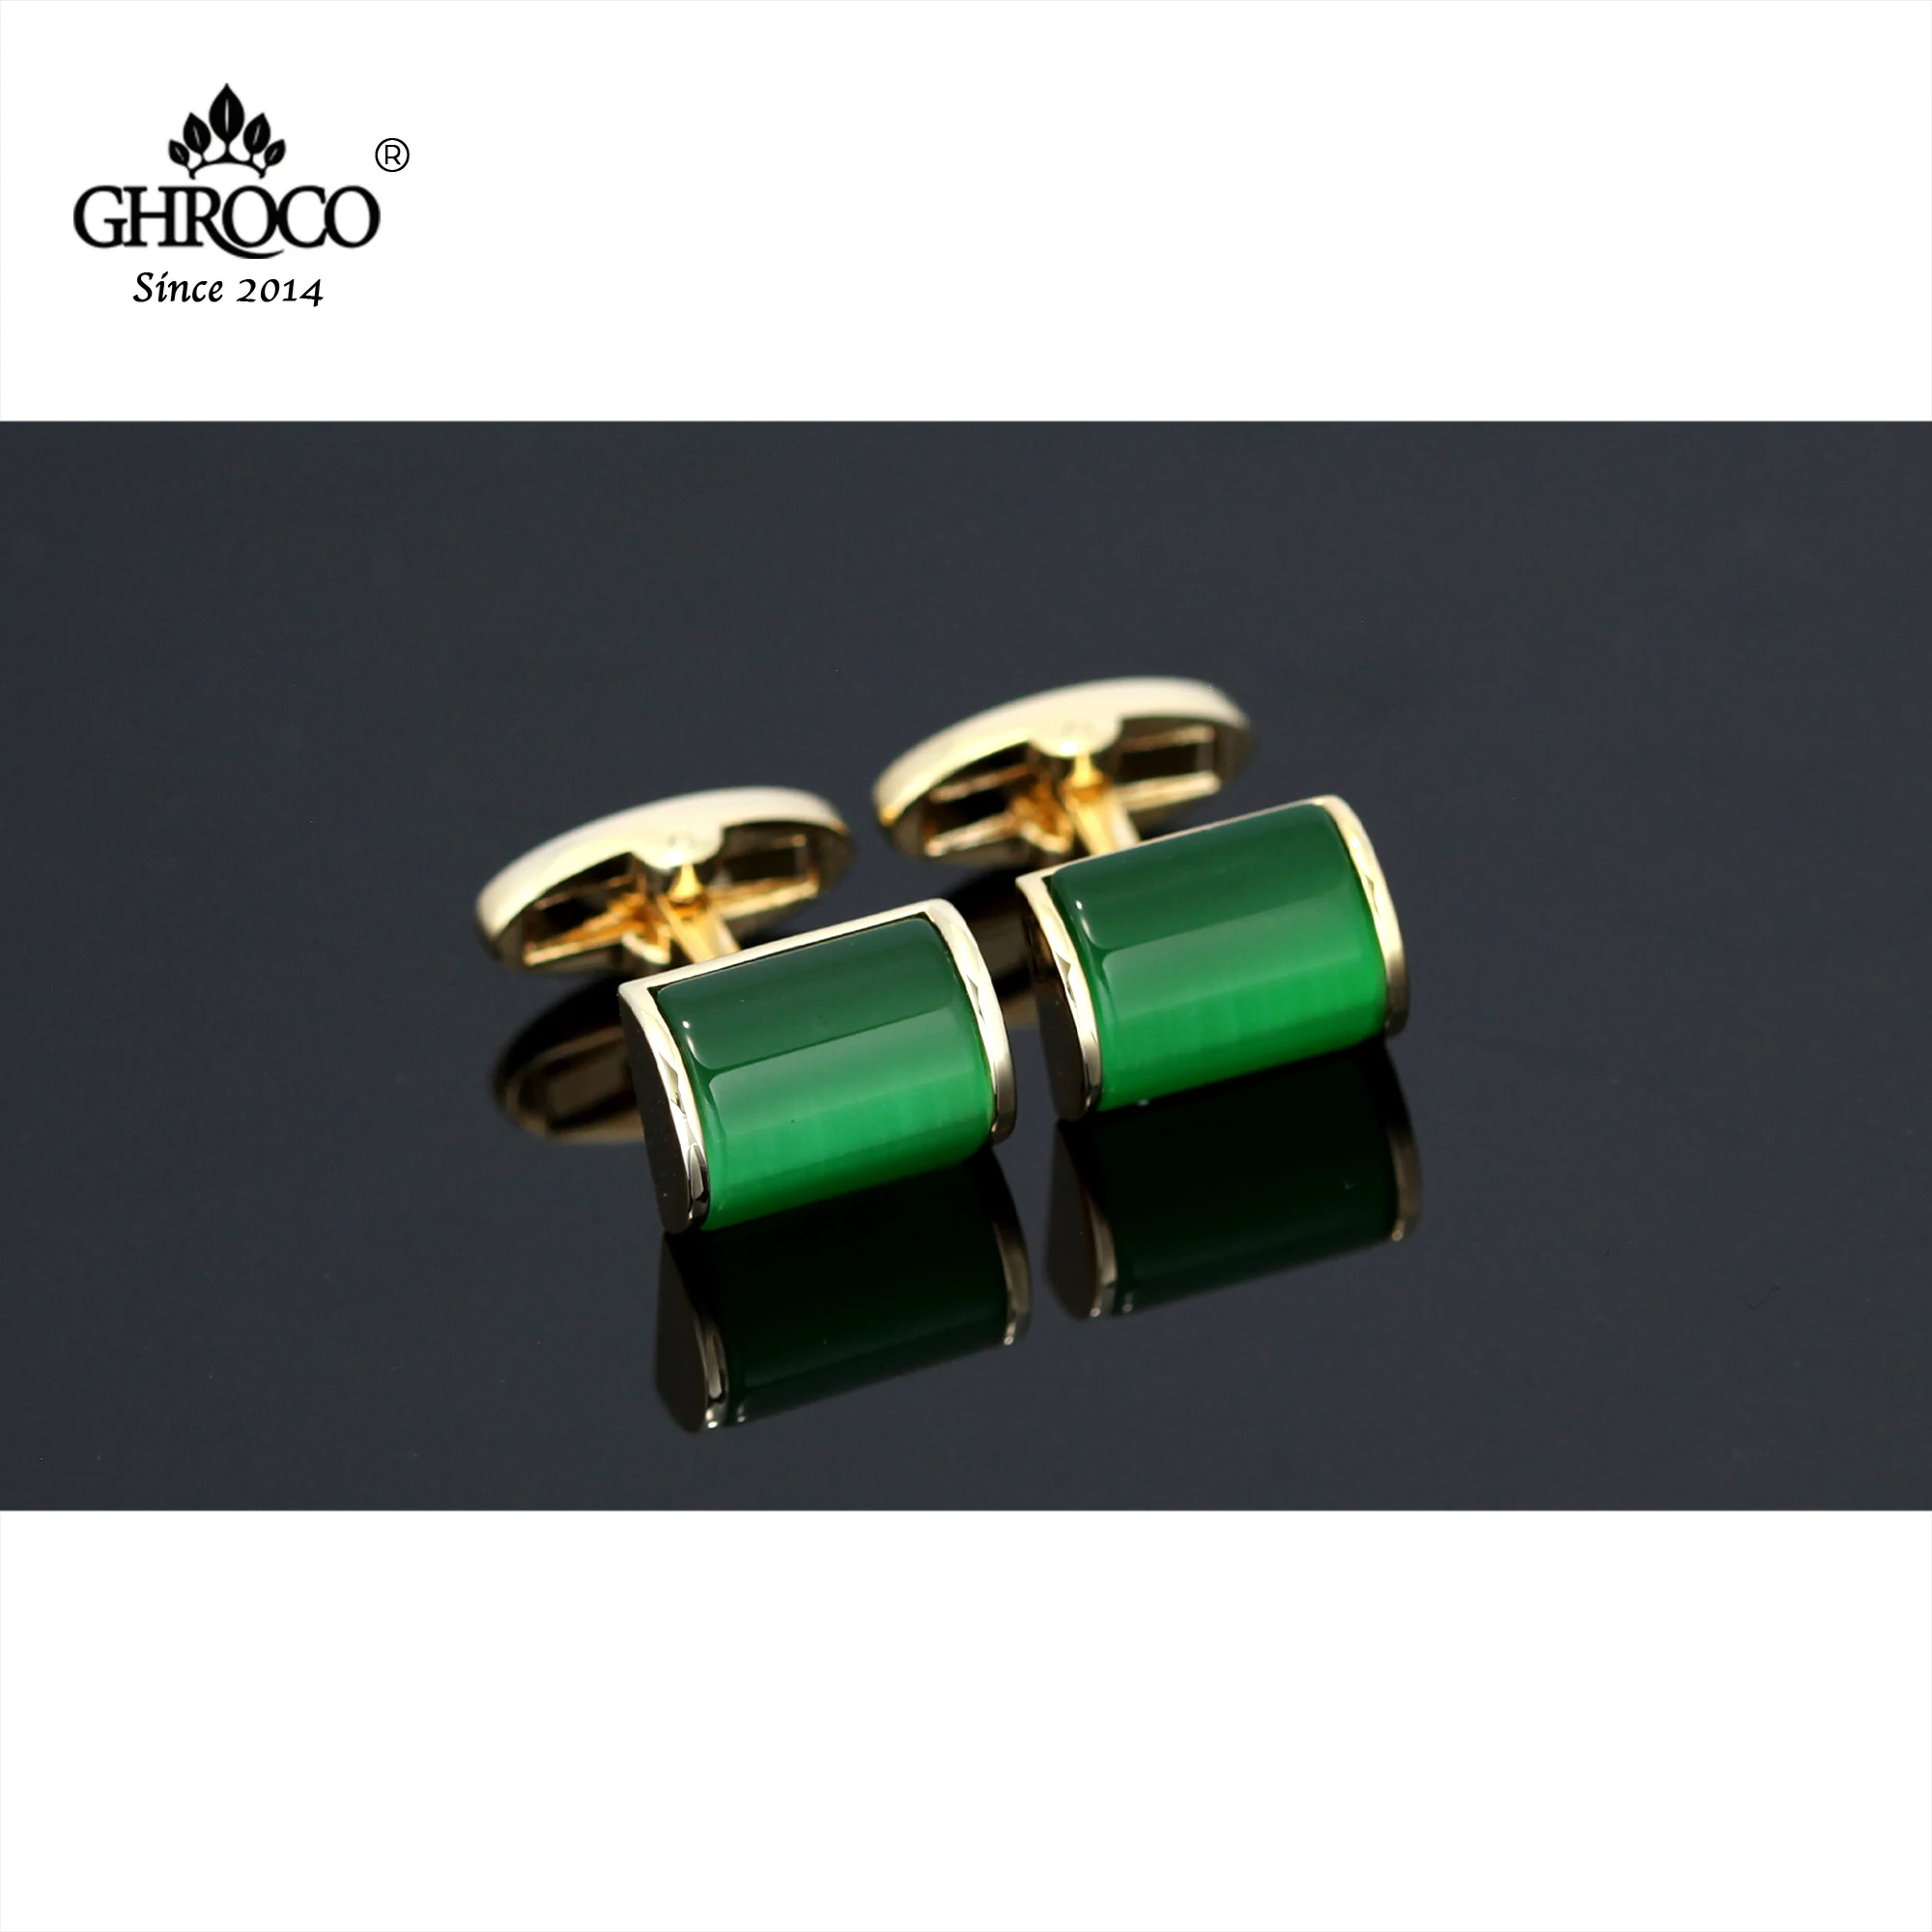 

GHROCO Charming Square Shape Green Opal Men’s Cufflinks for French Cuff Dress Shirt Great Gift for Business Men Woman & Wedding